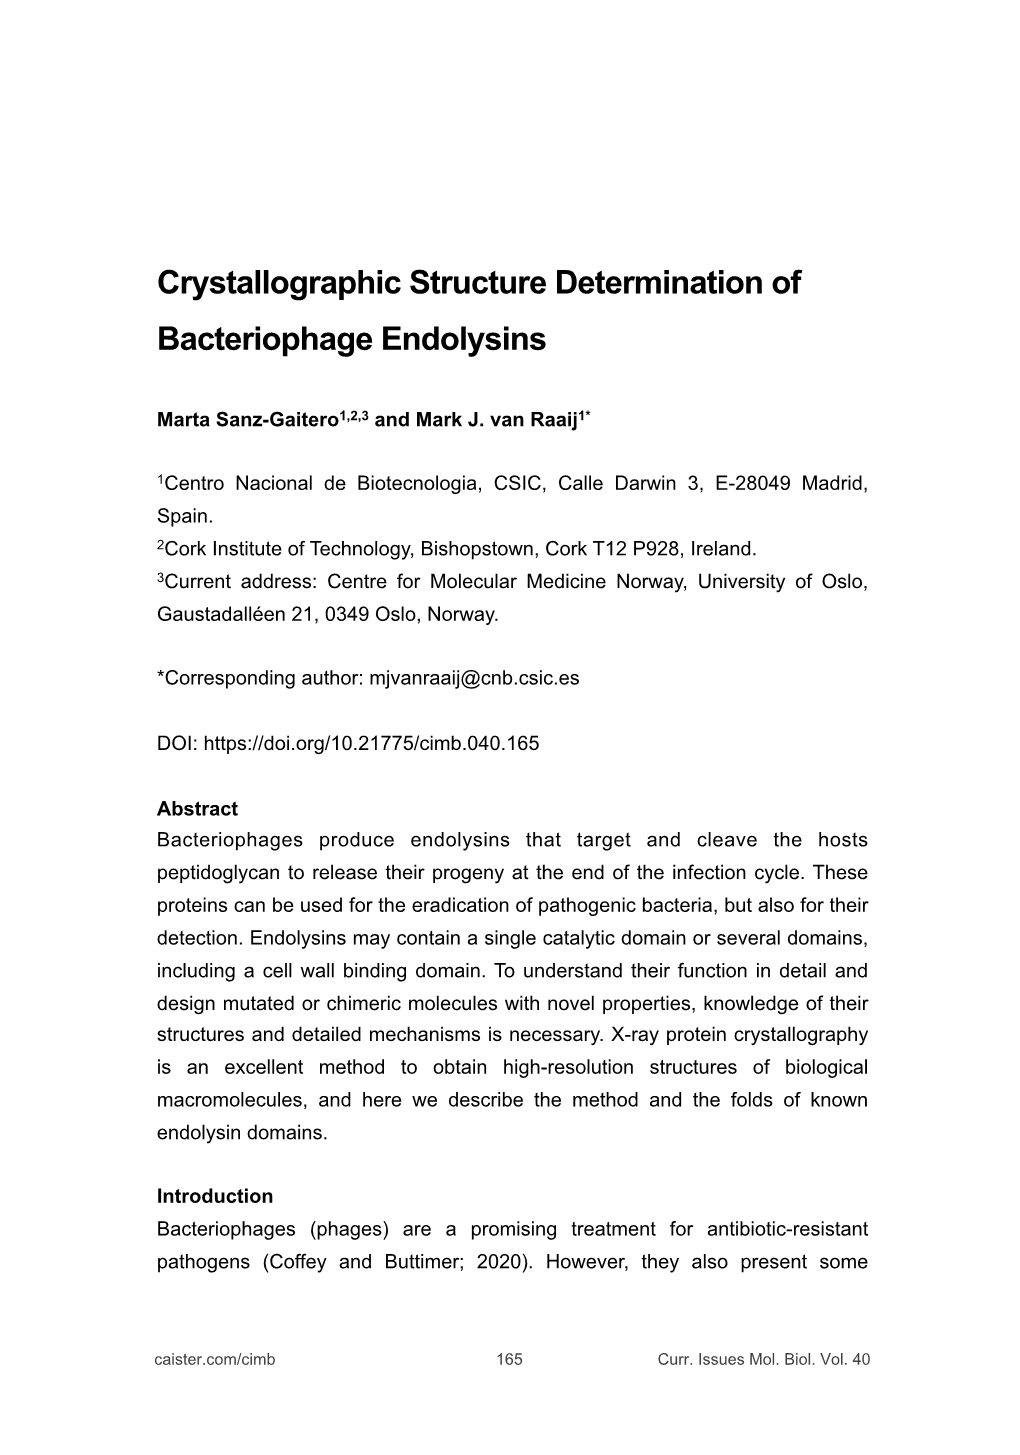 Crystallographic Structure Determination of Bacteriophage Endolysins